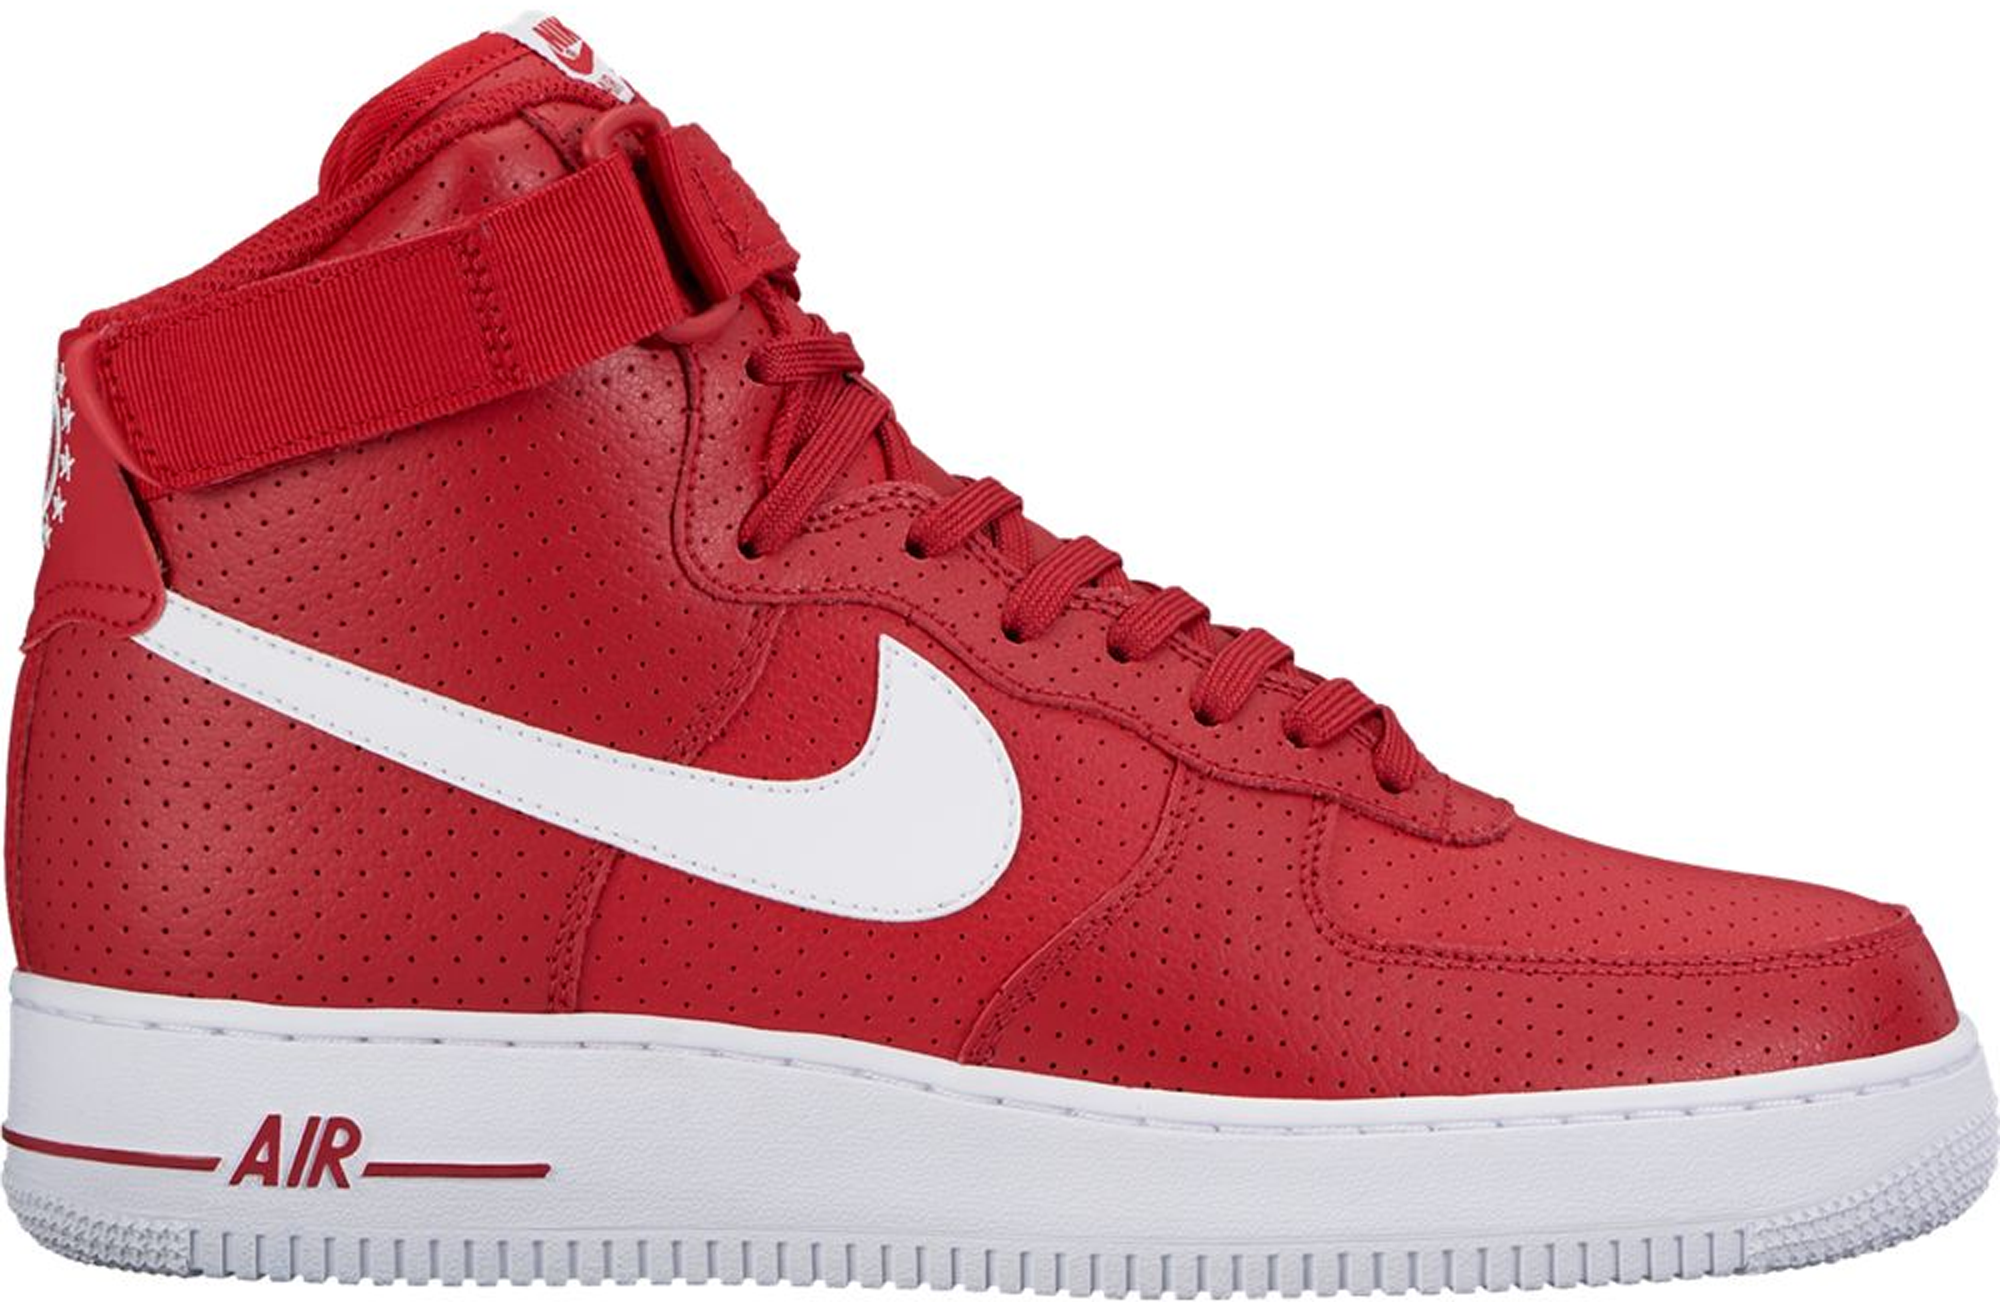 Nike Air Force 1 High Gym Red 